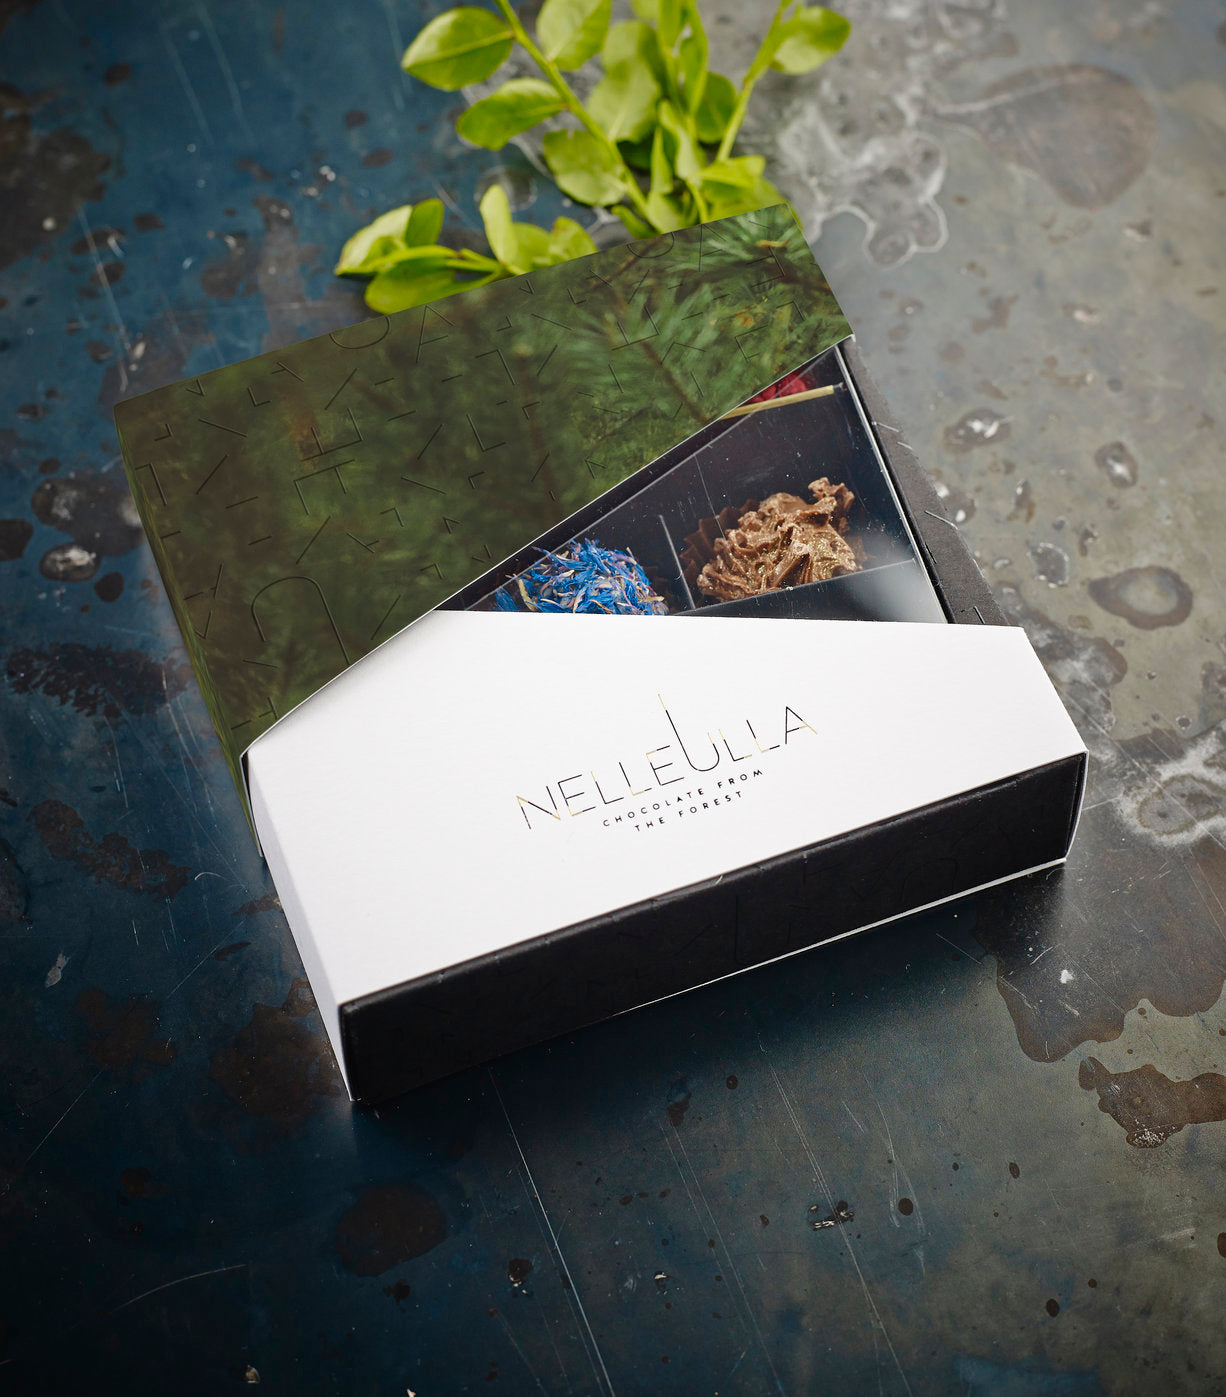 ANY 9 OR 16 TRUFFLE SELECTION IN NELLEULLA WILD BOX